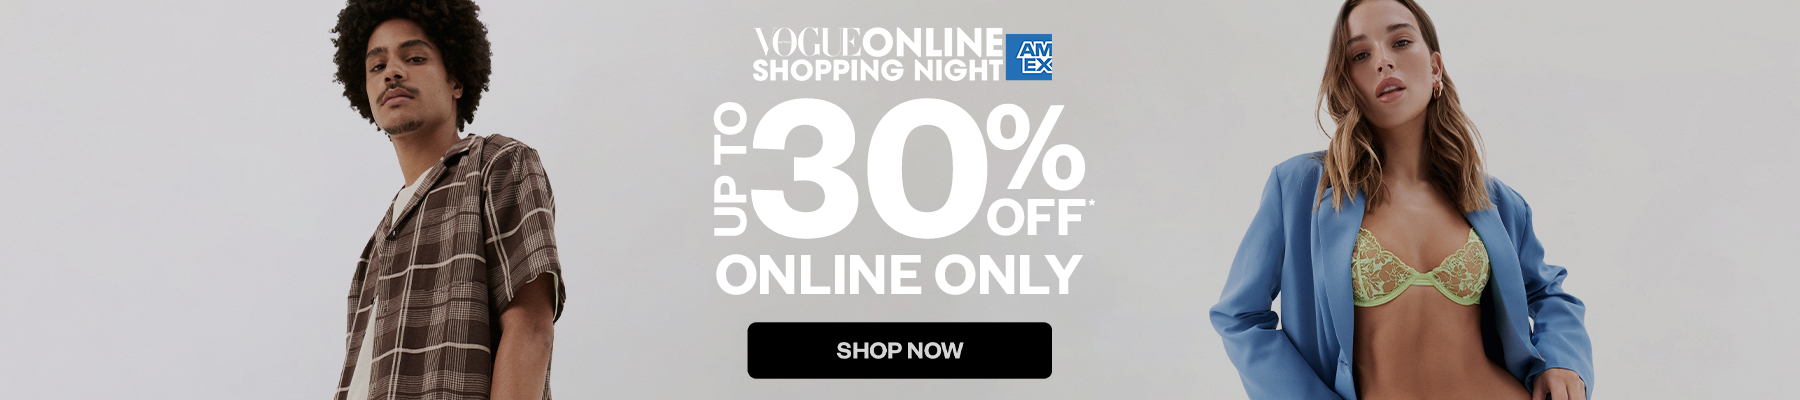 VOSN Shopping Night - Up to 30% OFF on clothing & footwear at General Pants